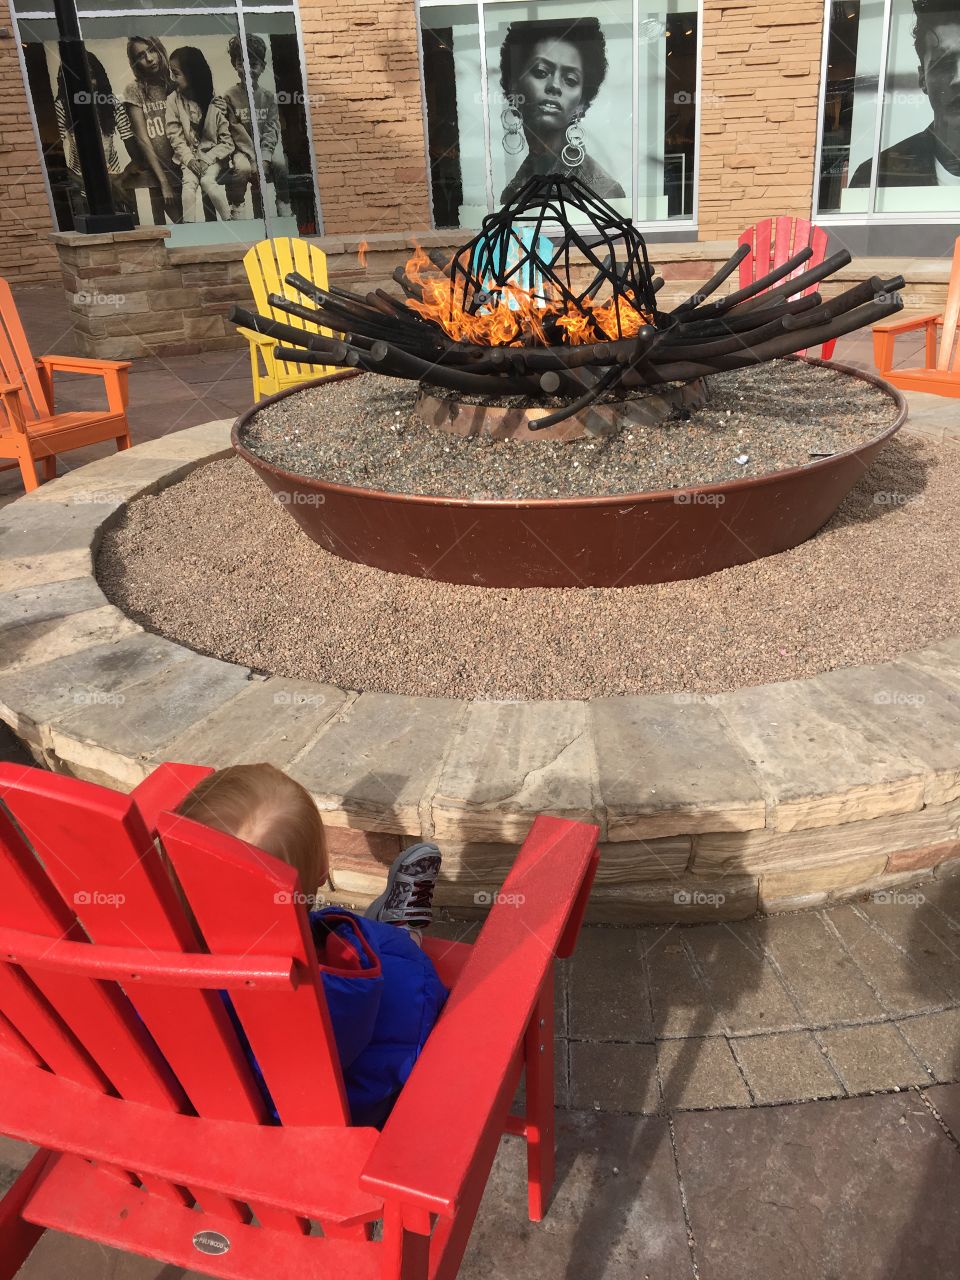 Campfire at an outdoor mall